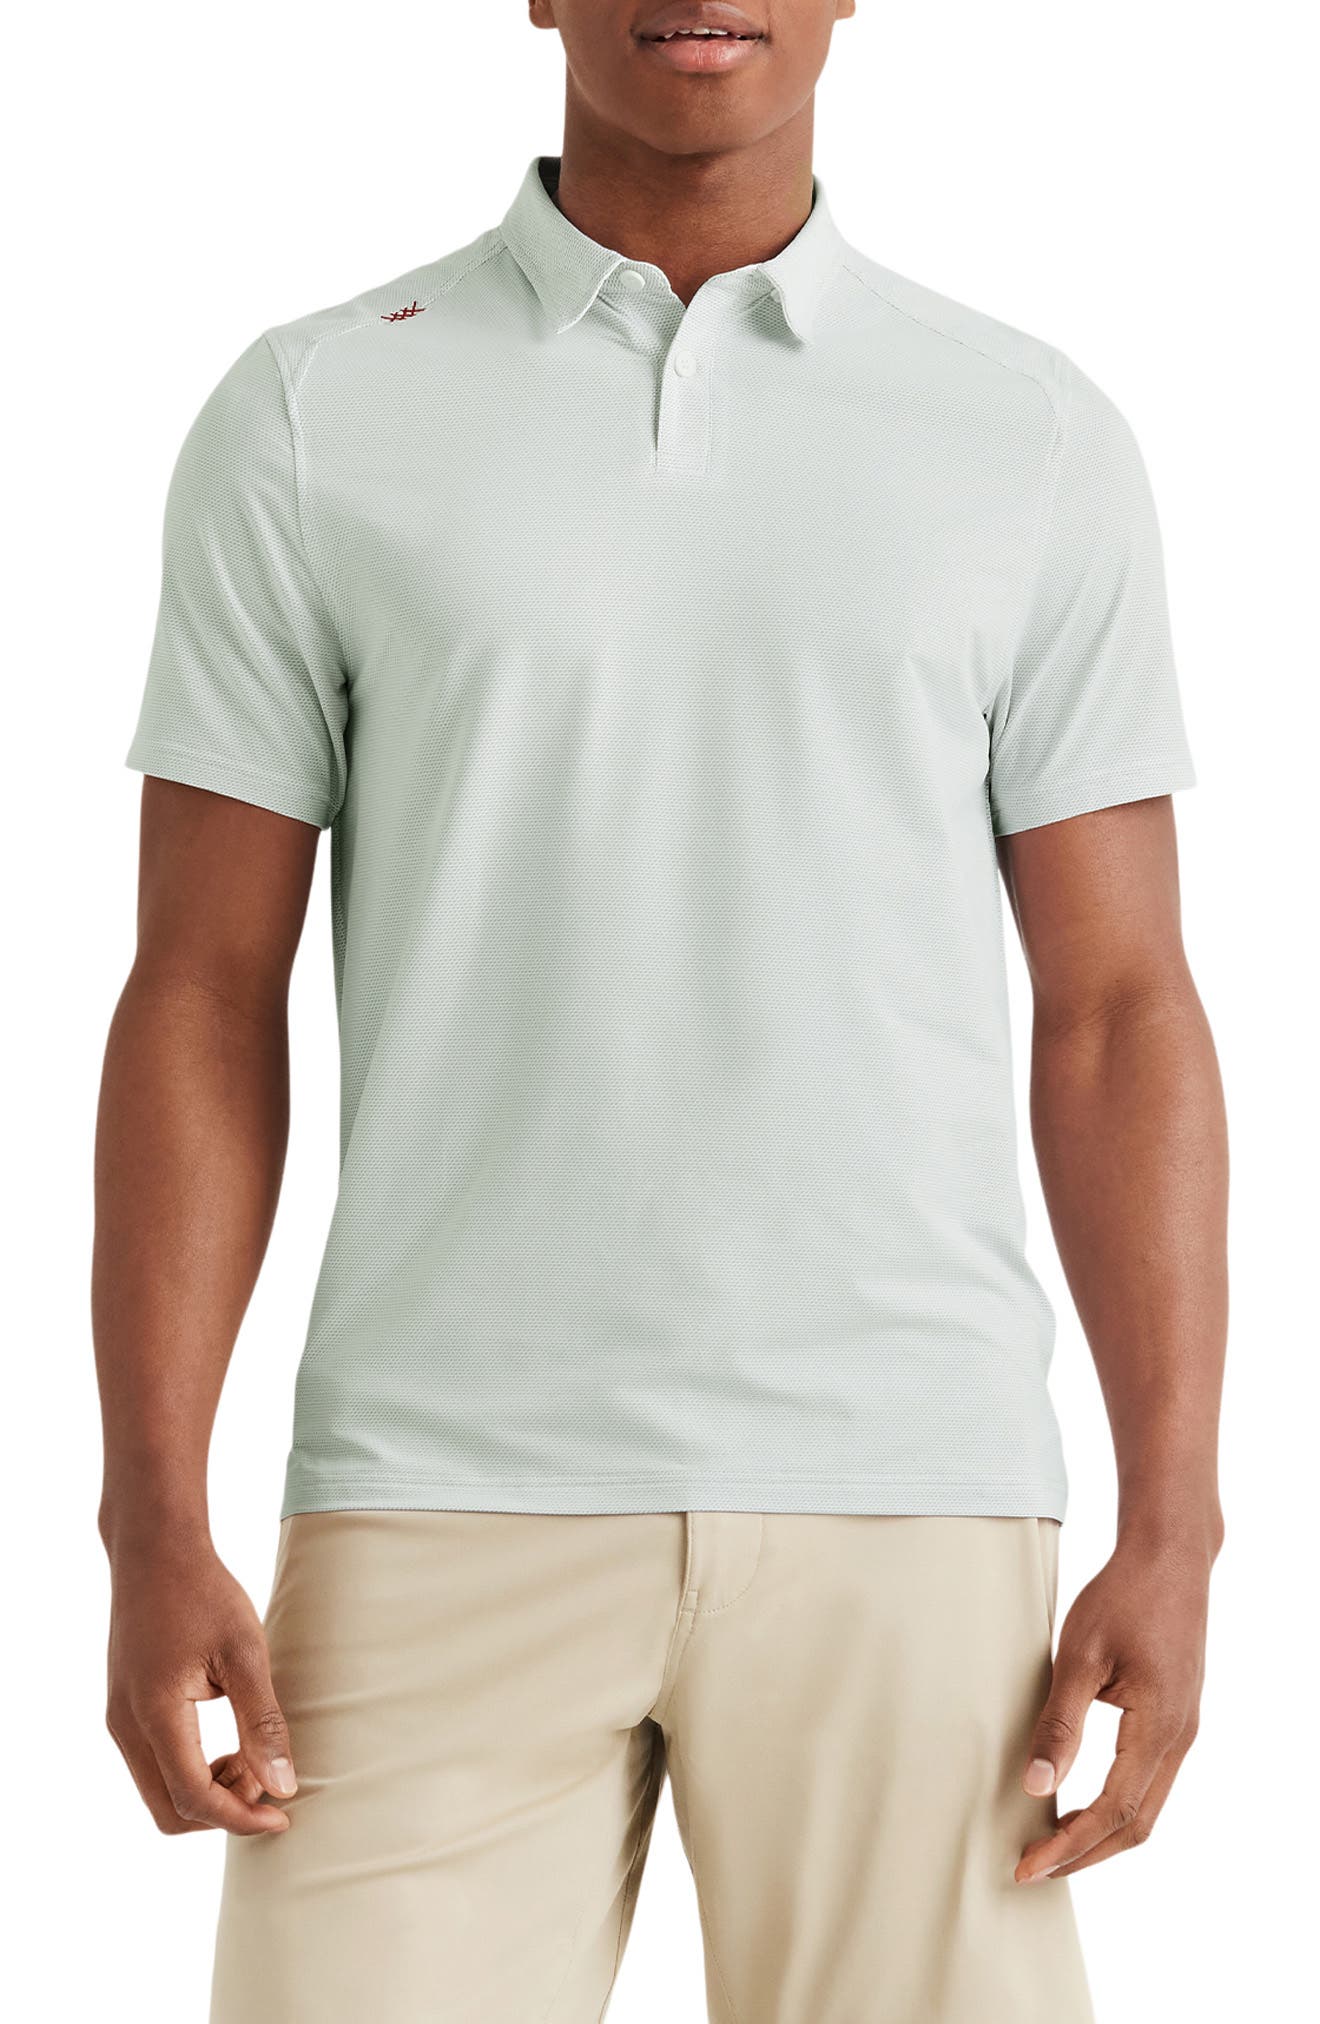 Mens Kappa Everyday Short Sleeves Basic Polo Shirt Top Sizes from S to XXL